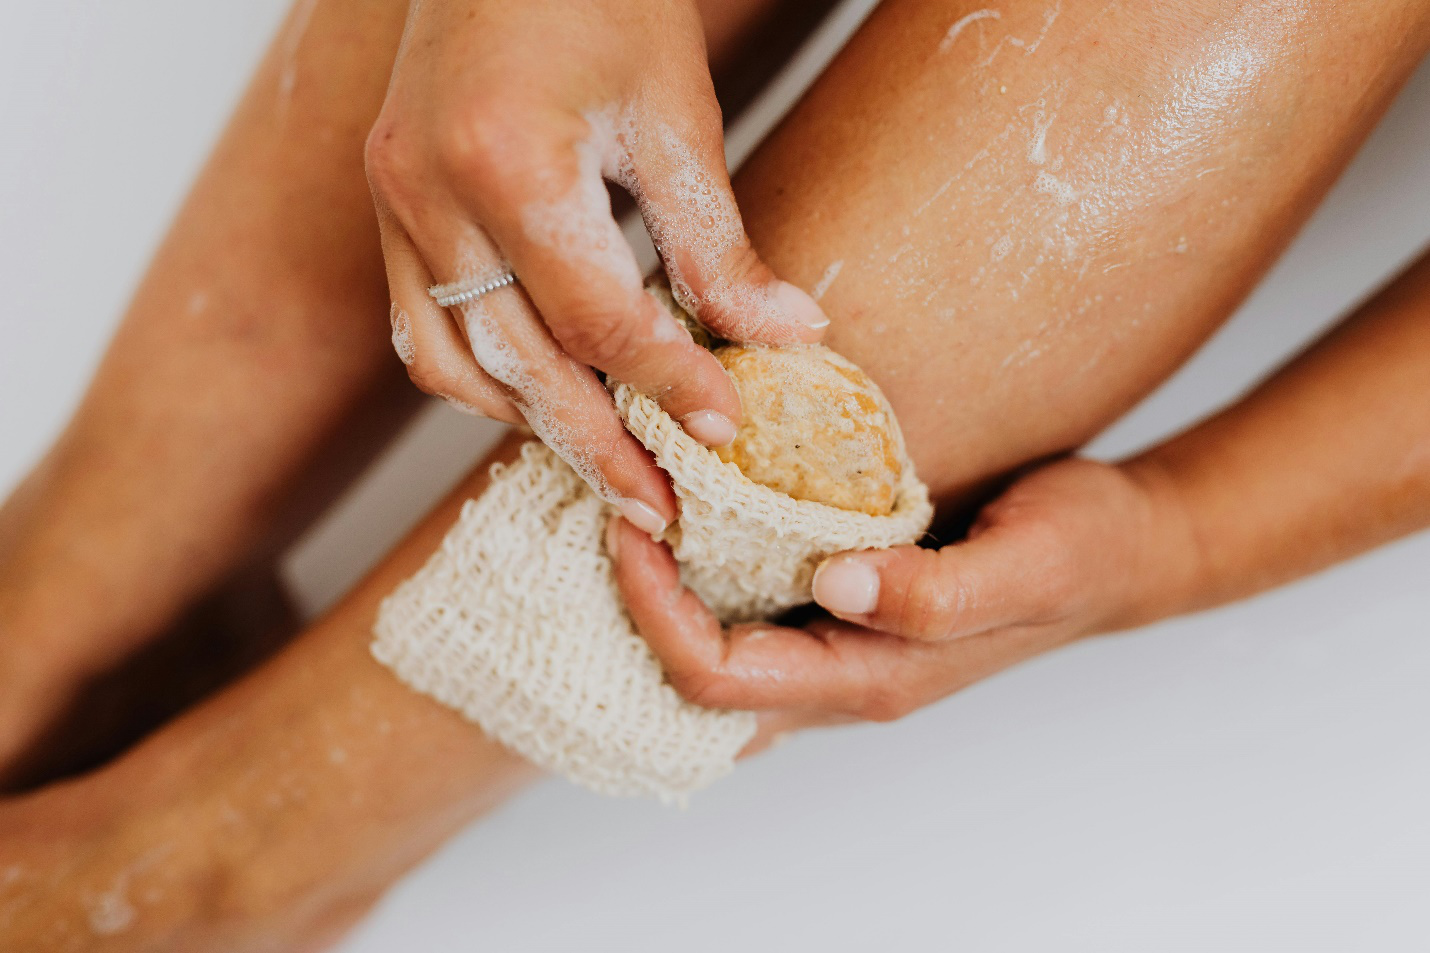  Hand holding soap and scrub, exfoliating leg to prepare for spray tanning service.